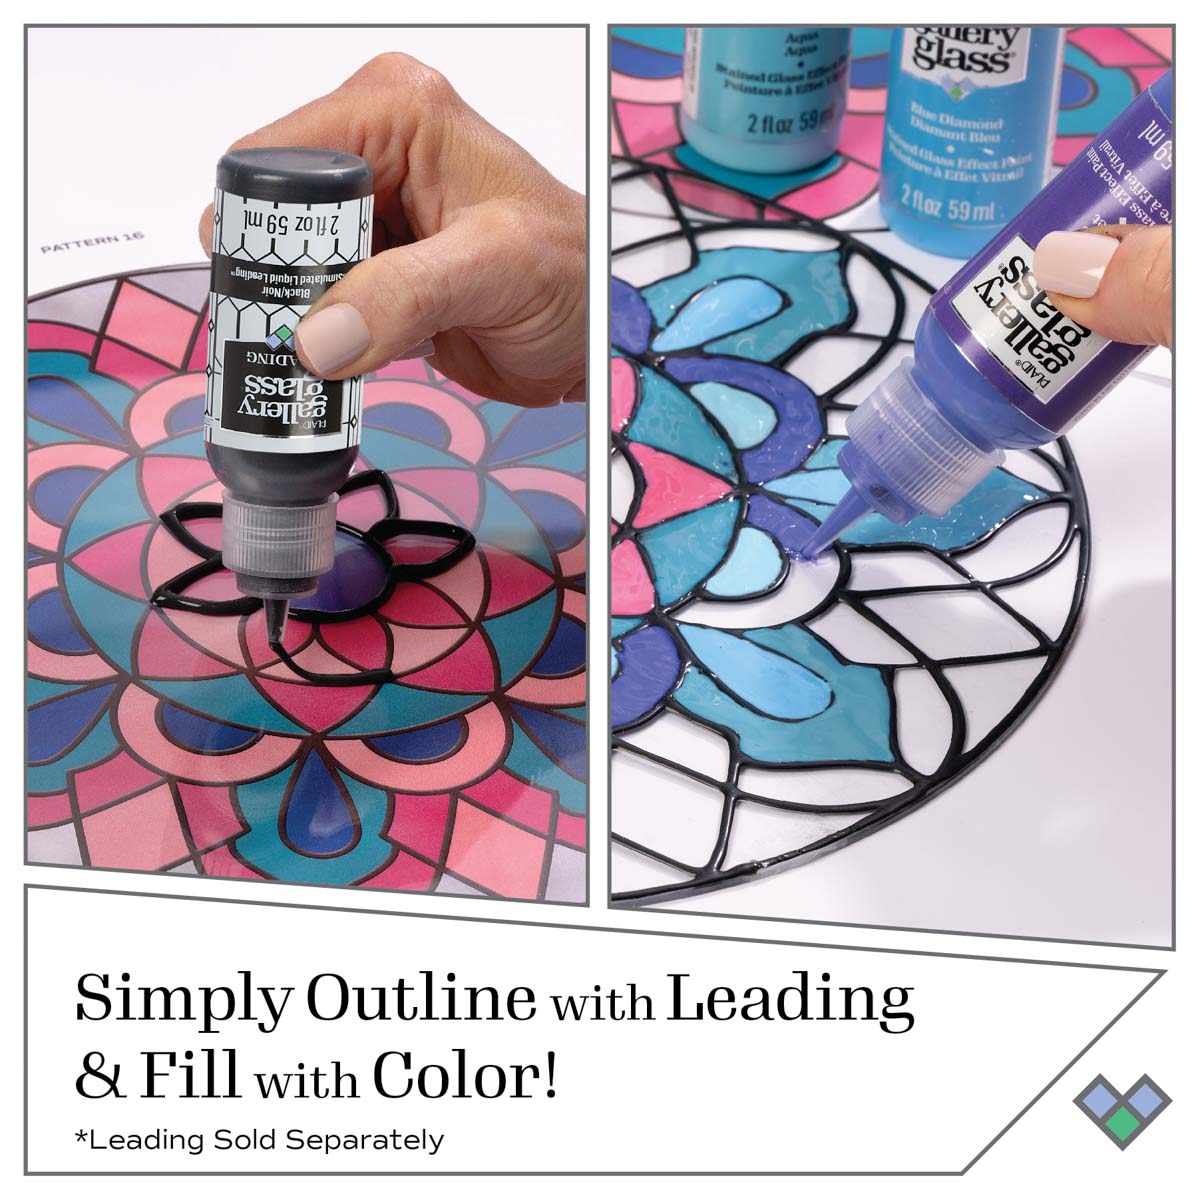 Gallery Glass ® Metallic™ Stained Glass Effect Paint - Gold, 2 oz. - 19677